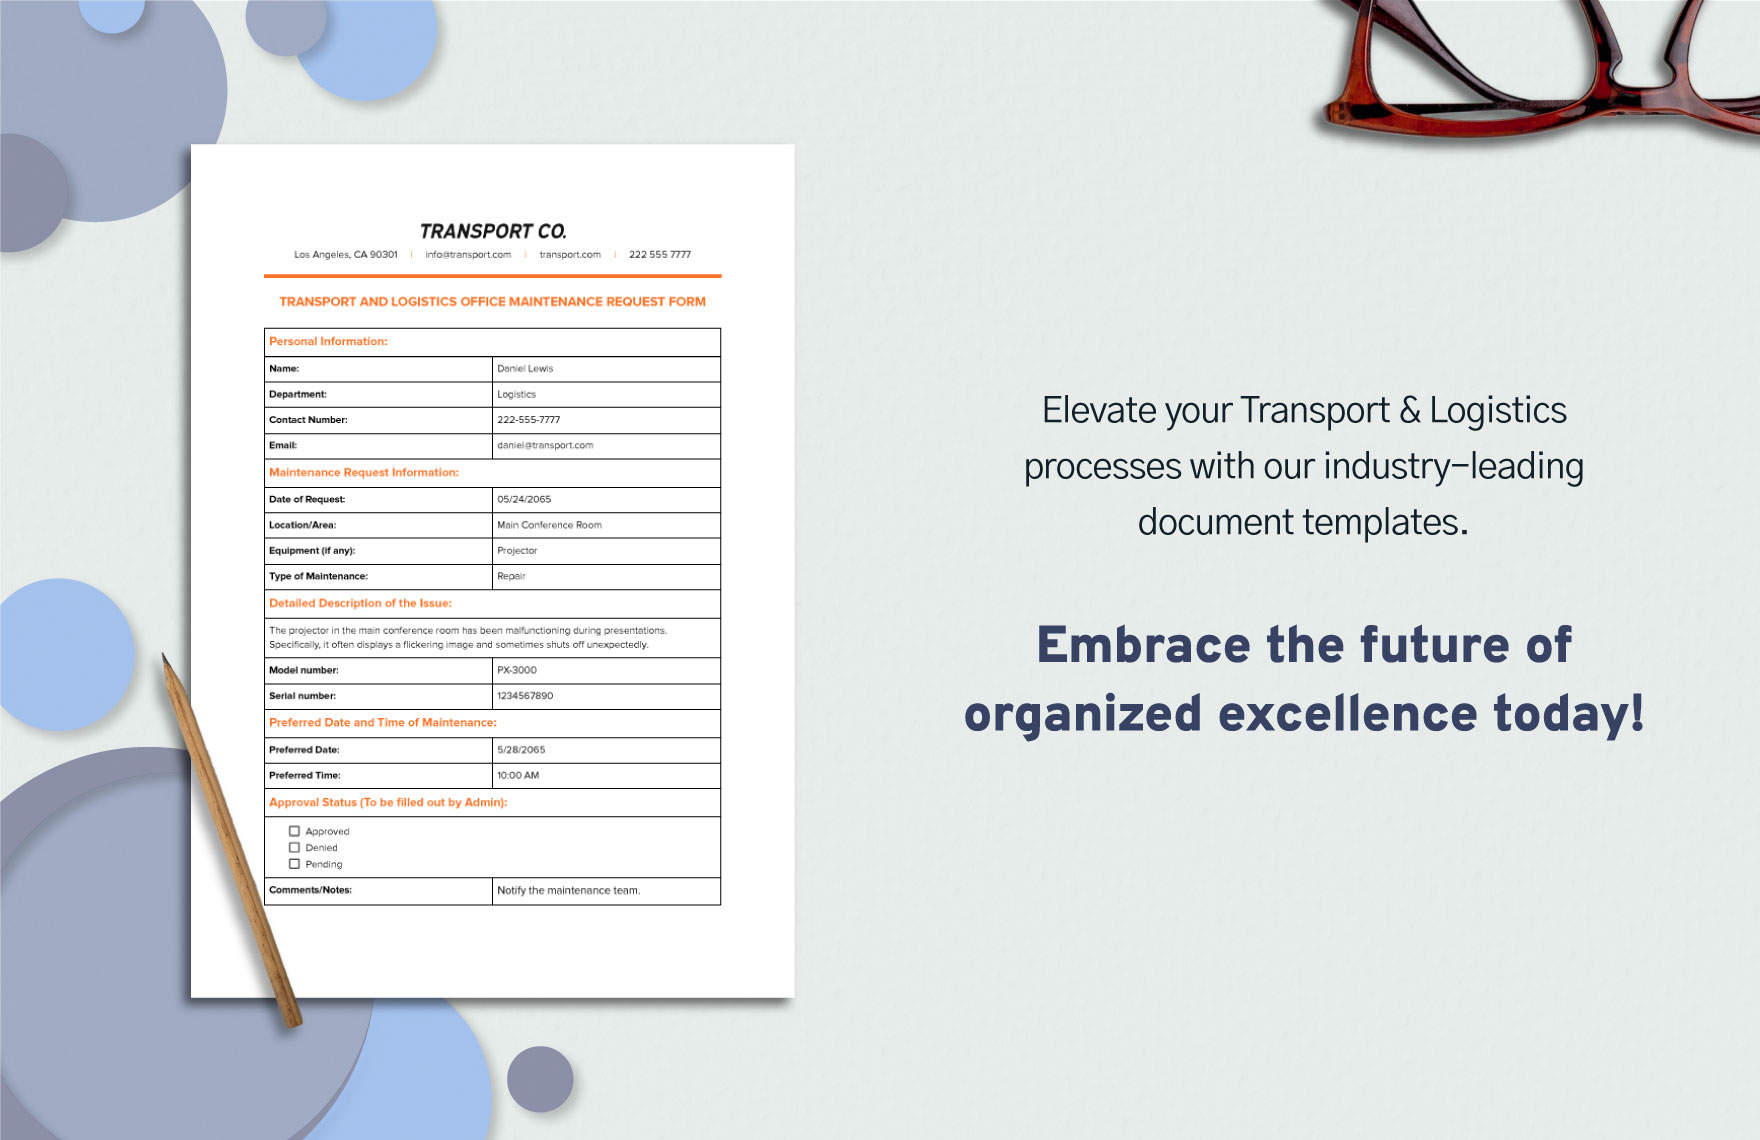 Transport and Logistics Office Maintenance Request Form Template